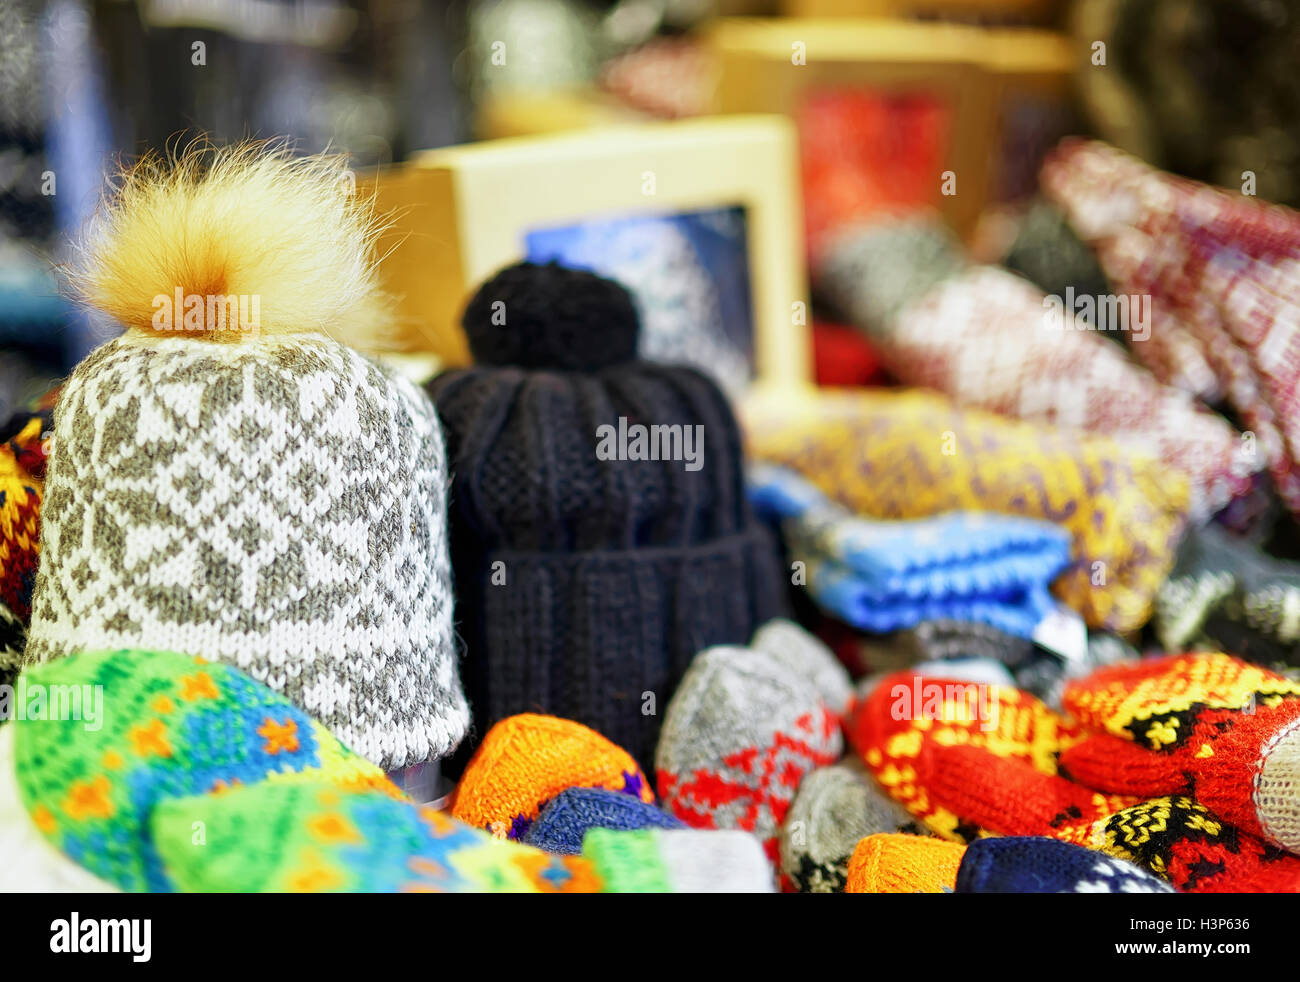 Two warm hats among other knitted clothes displayed for sale at the Christmas market in old Riga, Latvia. At this stand people can also buy festive mittens, gloves, scarfs and little toys for kids. Stock Photo